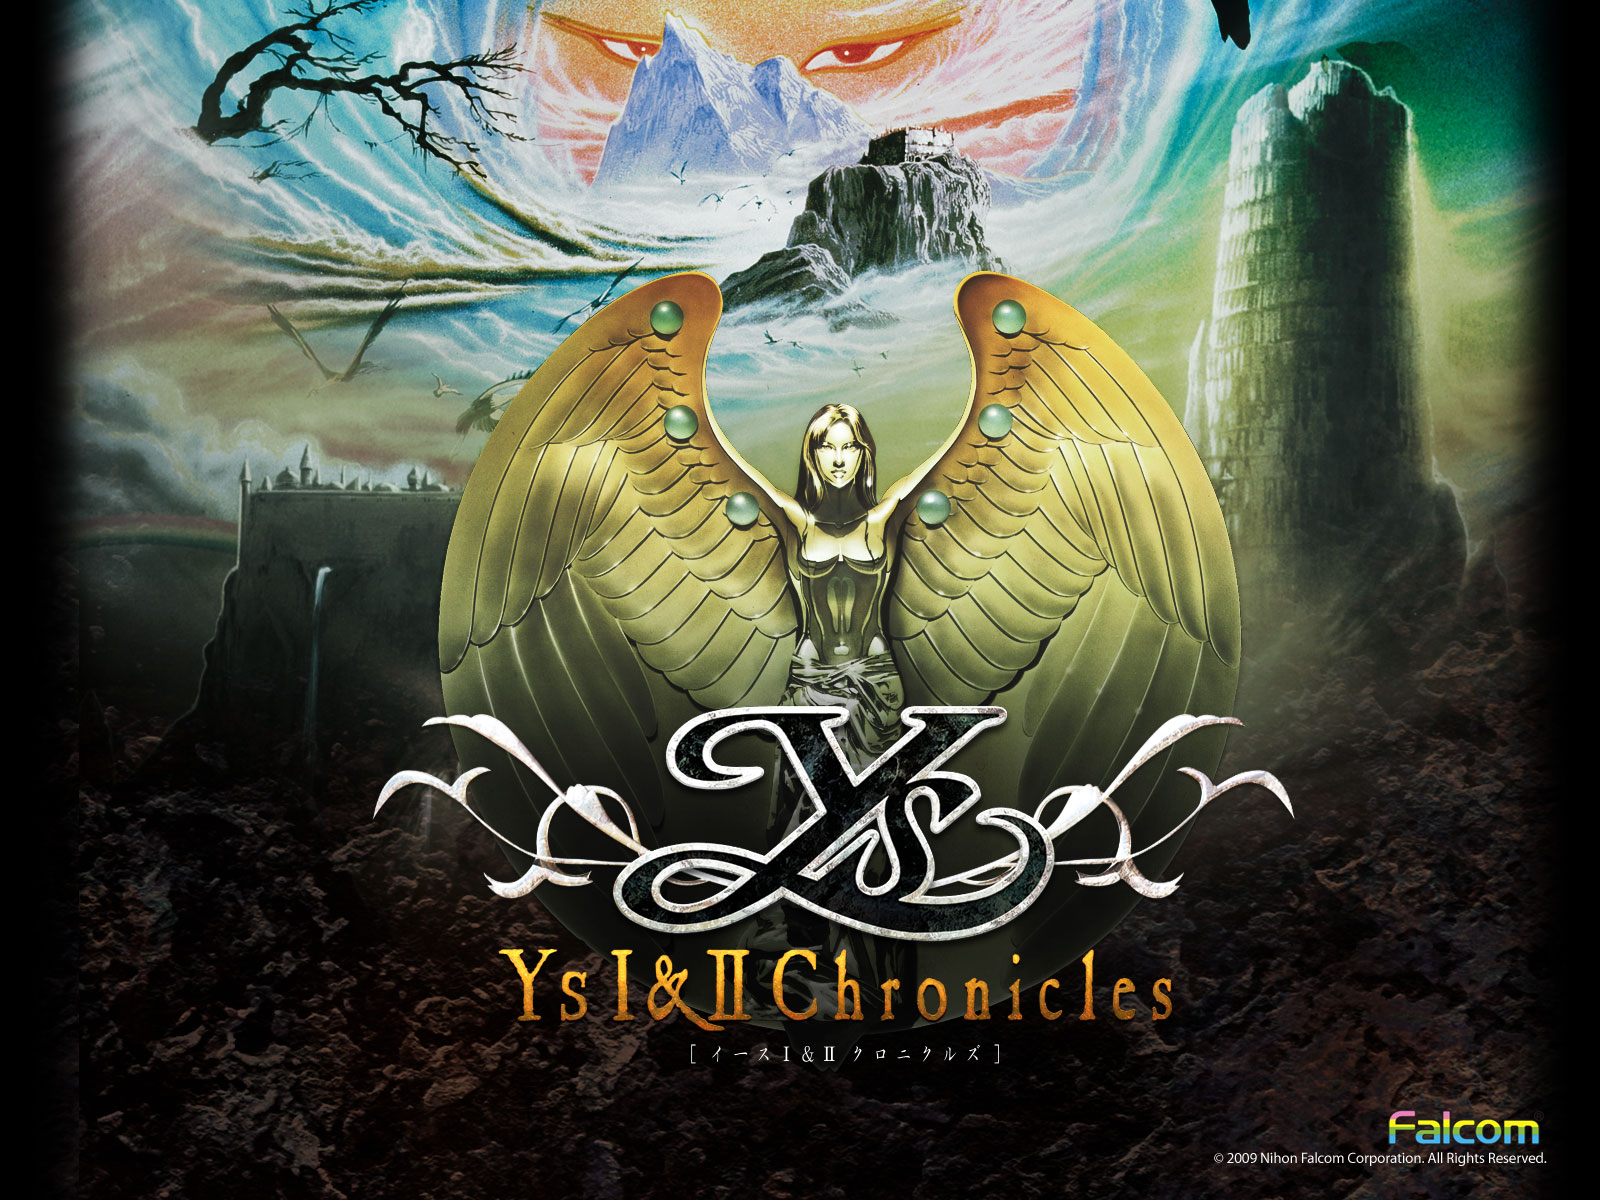 1600x1200 > Ys: Chronicles Wallpapers